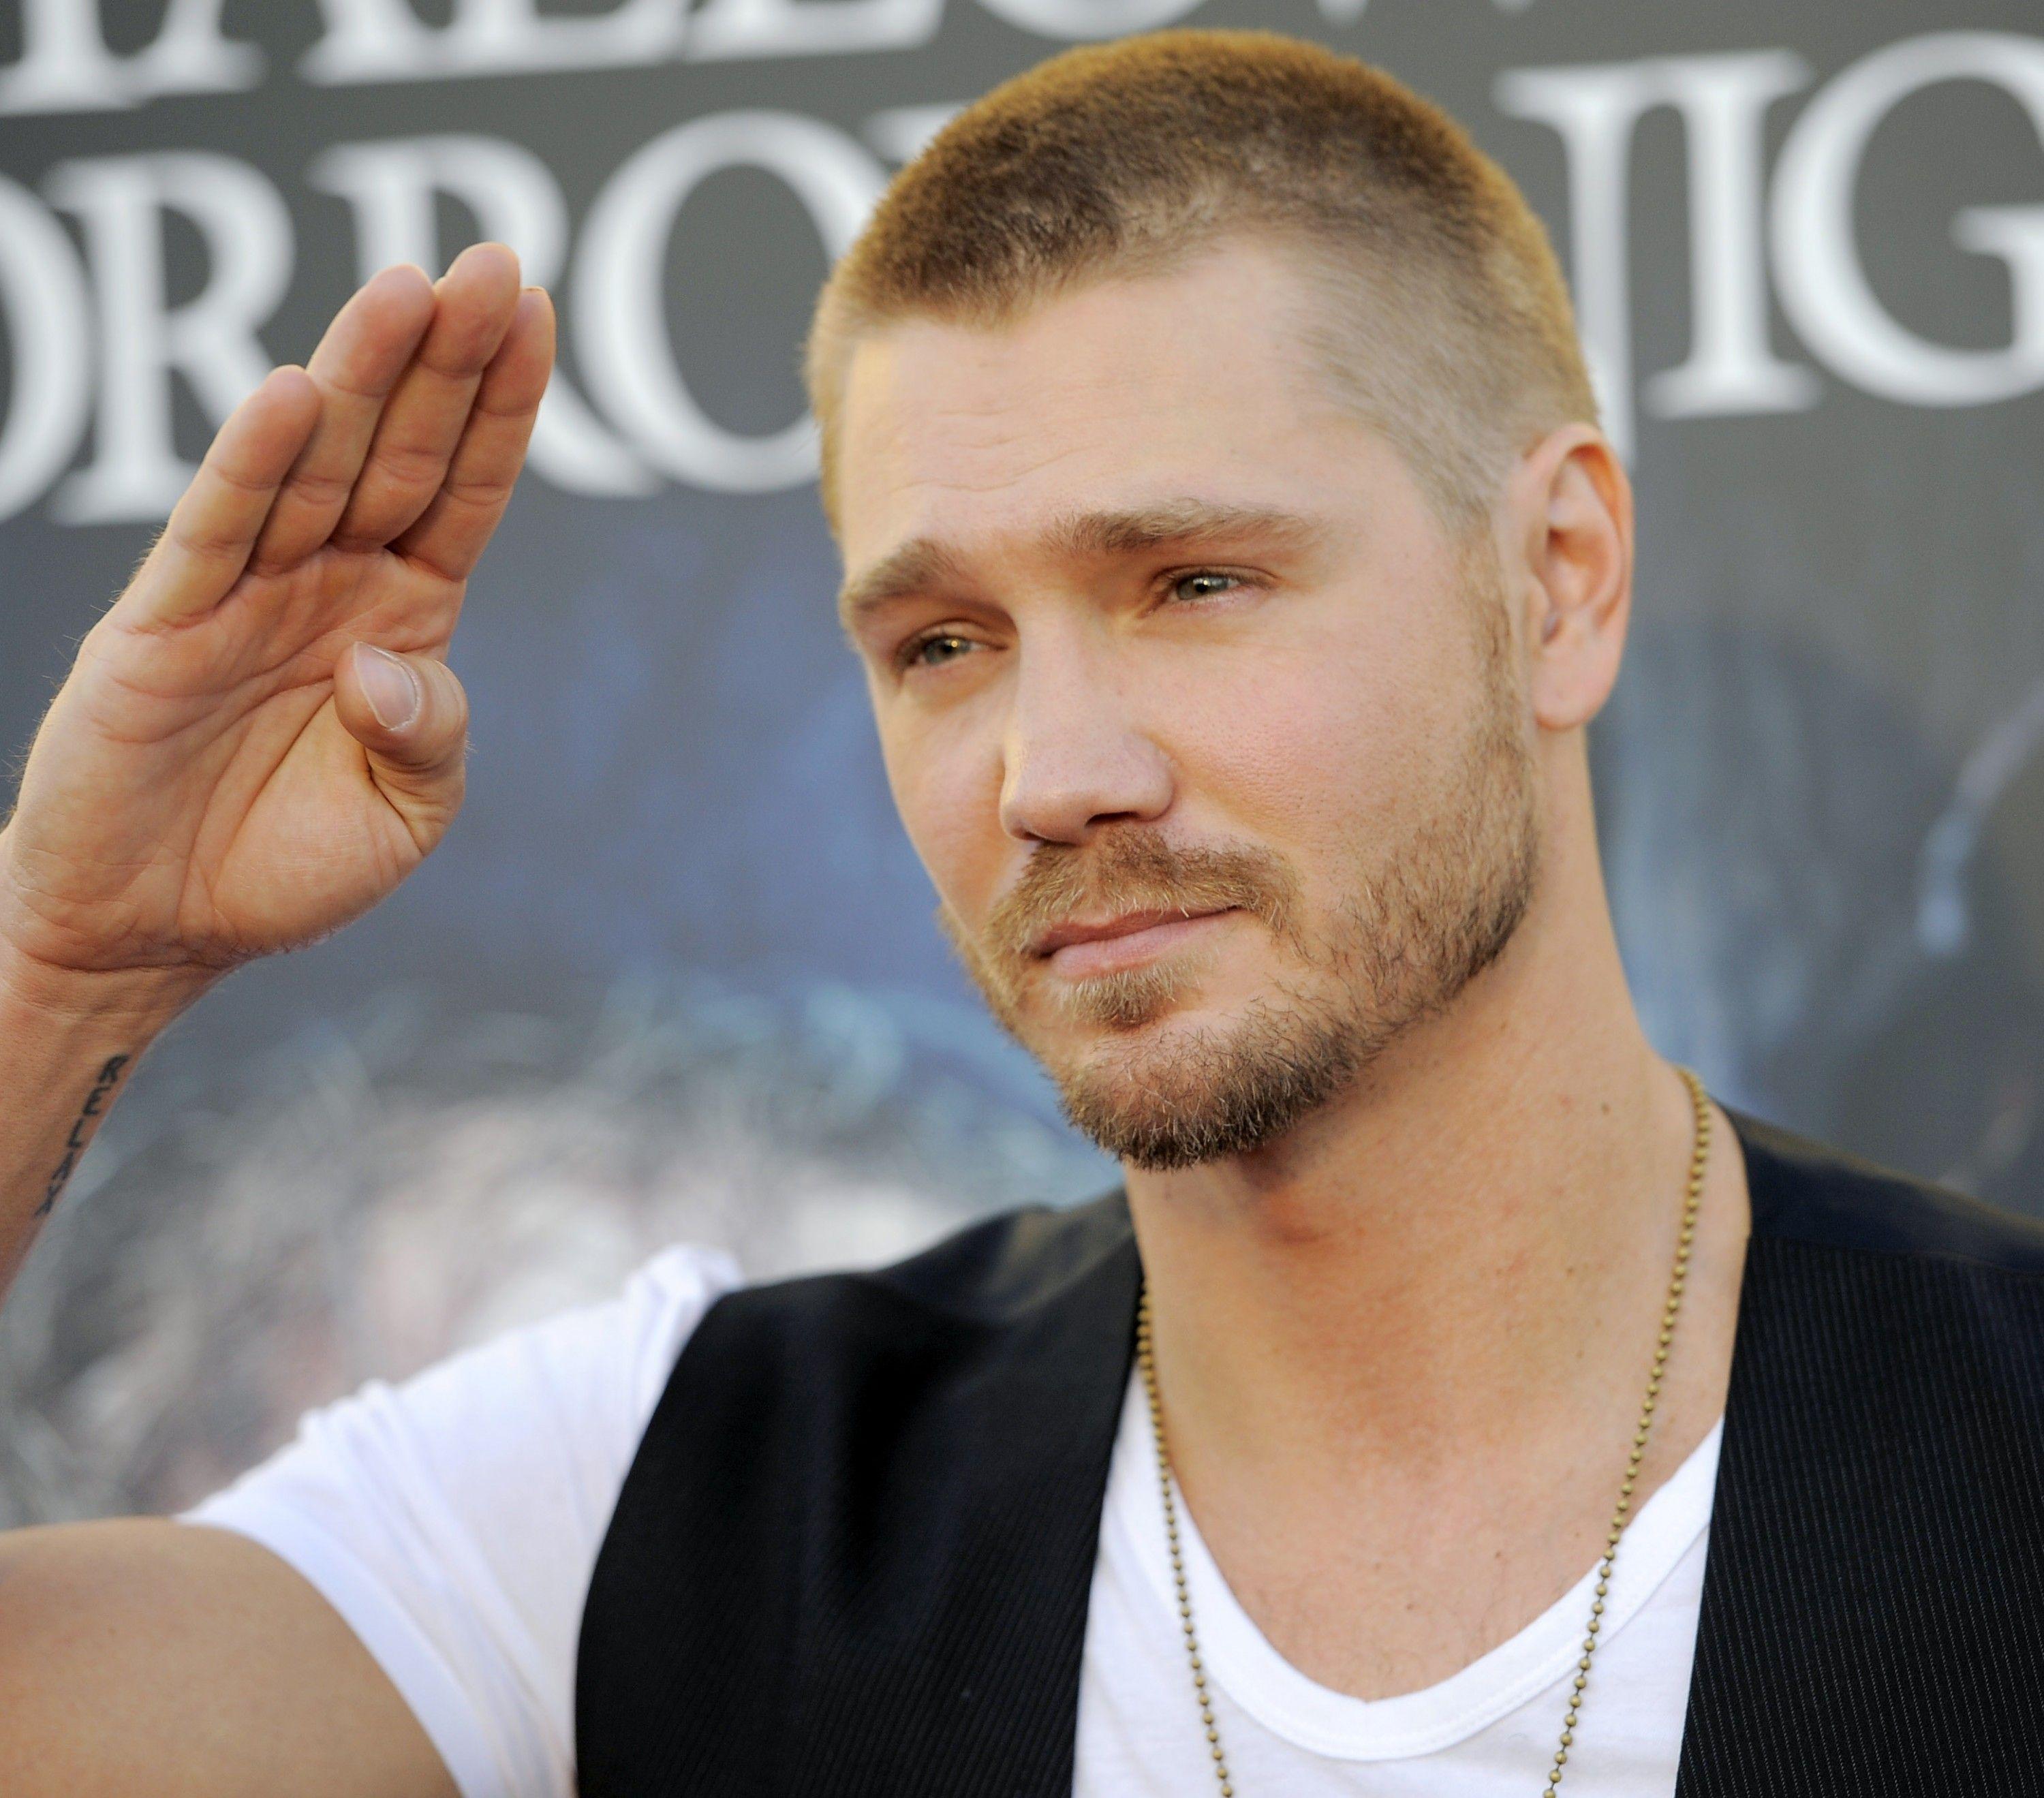 Download 3000x2639 Chad Michael Murray, Model, Actor, Hand Gesture